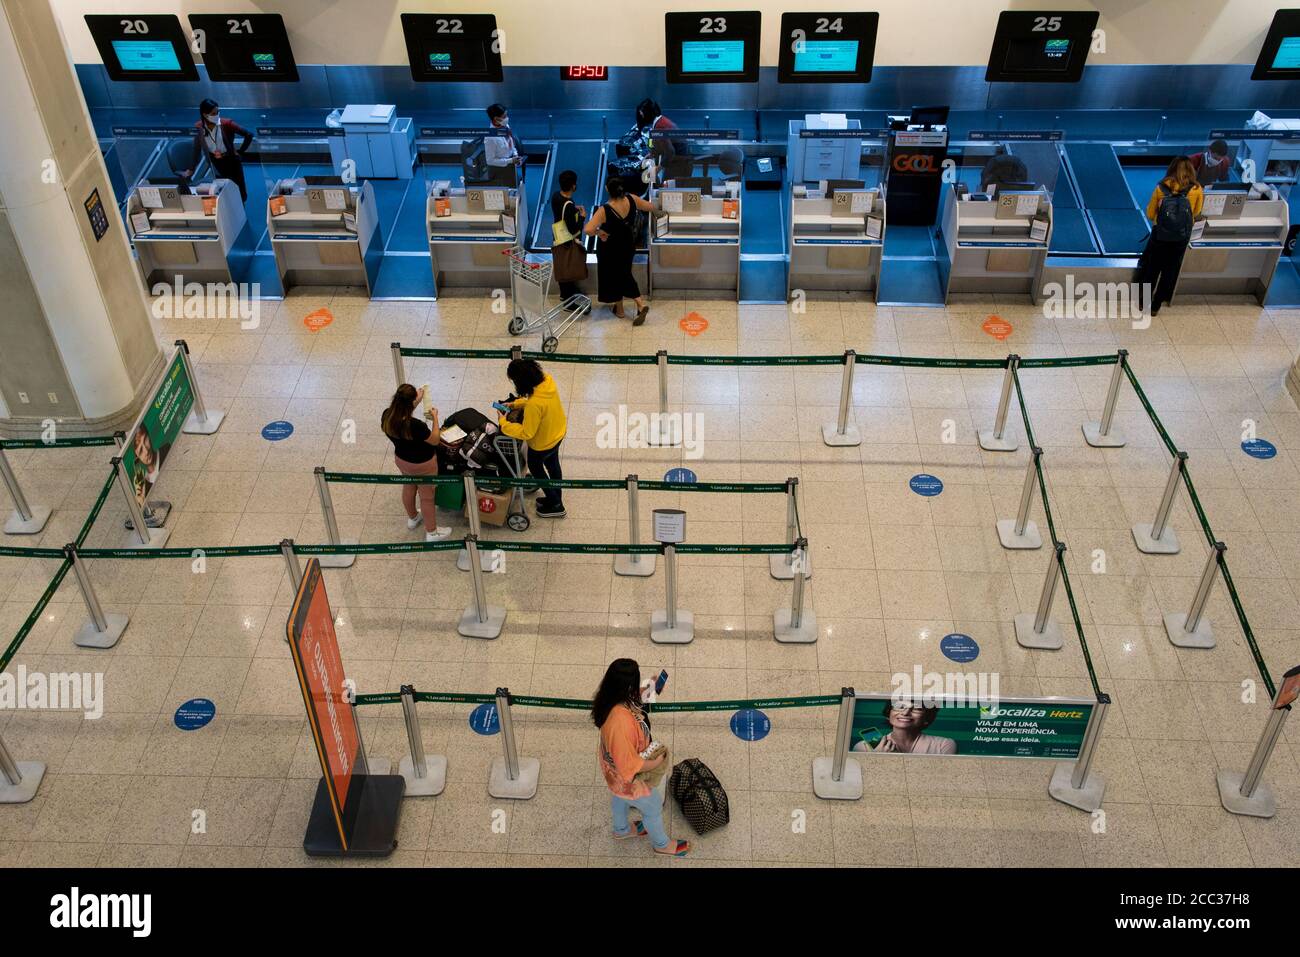 Rio de Janeiro, Brazil - July 16, 2020: Very few travelers at the check in counter at Santos Dumont airport during the Coronavirus pandemic. Stock Photo